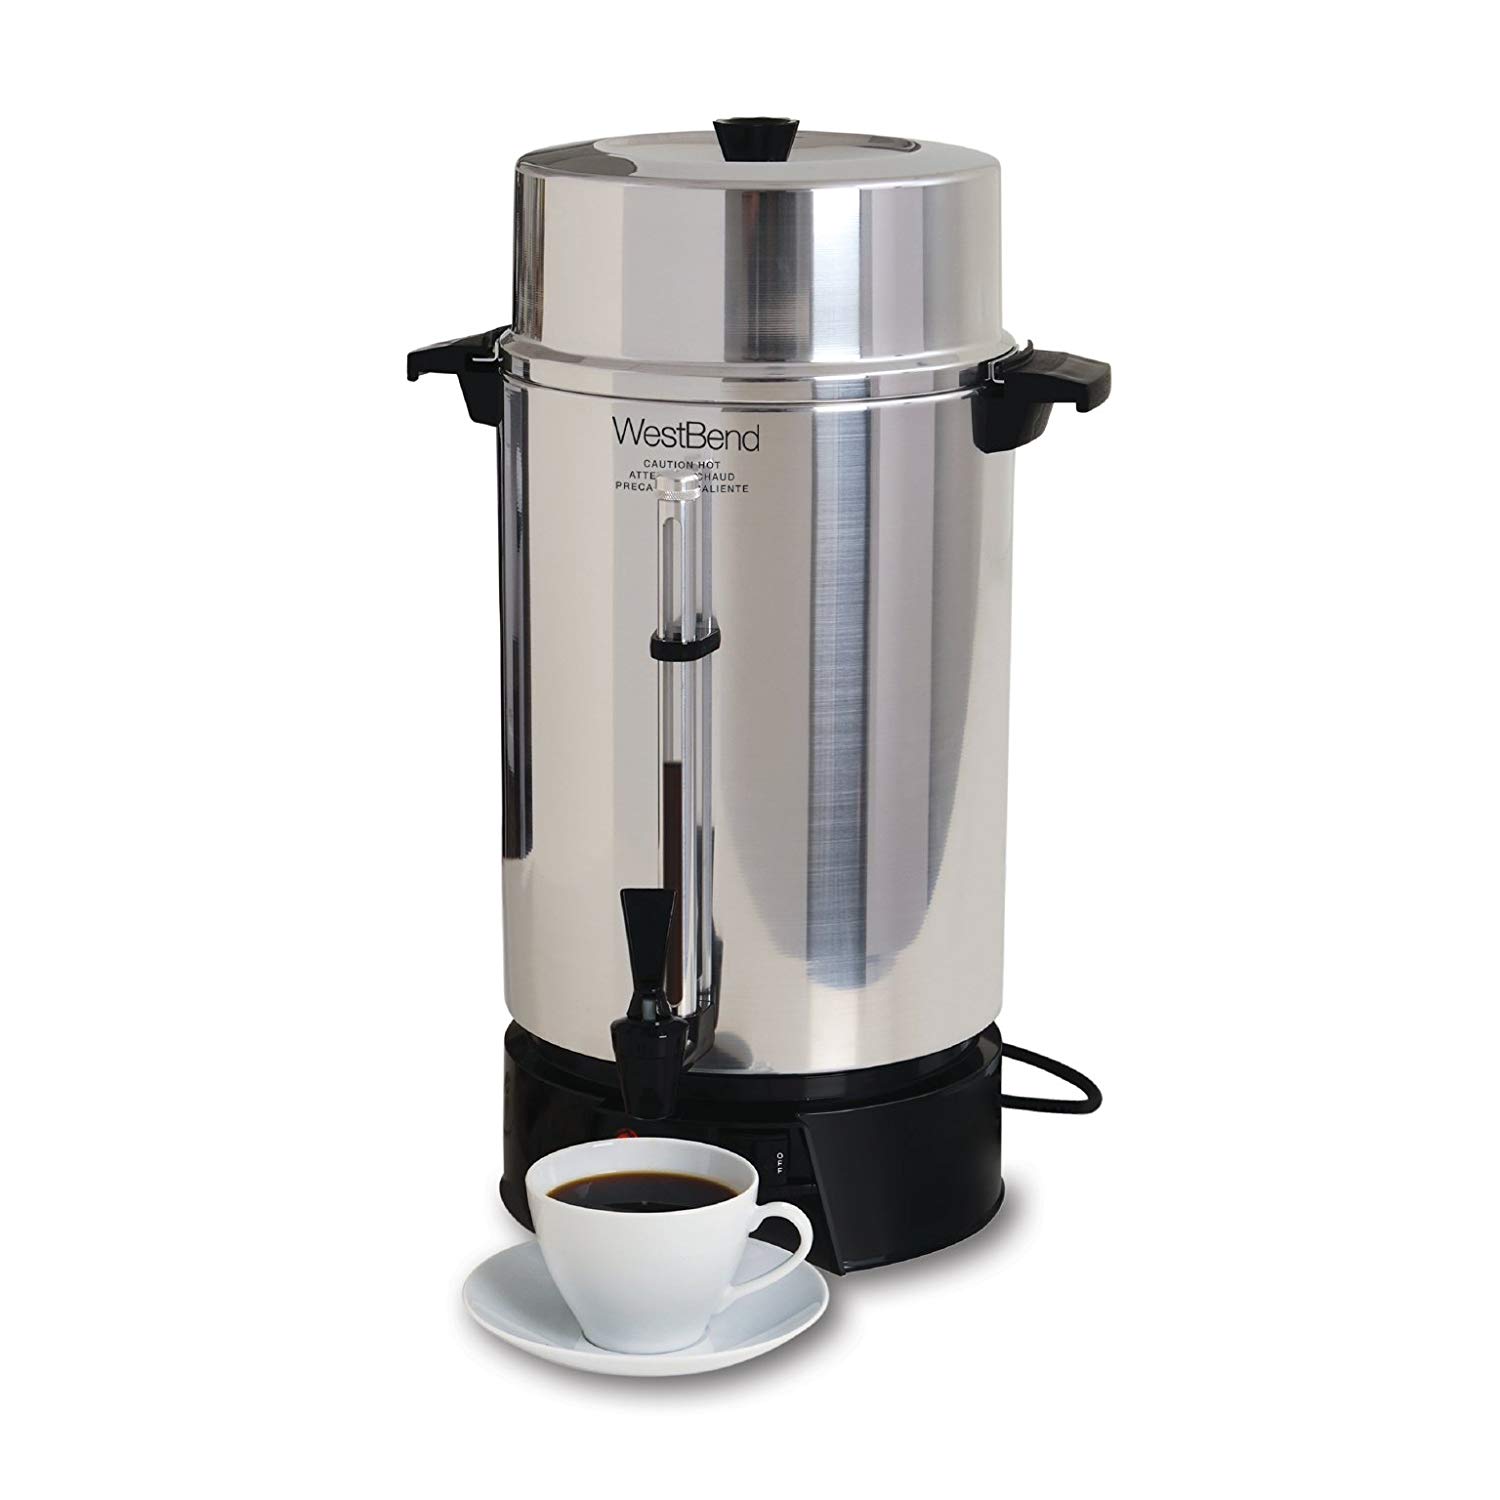 LARGE SILVER COFFEE MAKER Rentals Bemidji MN, Where to Rent LARGE